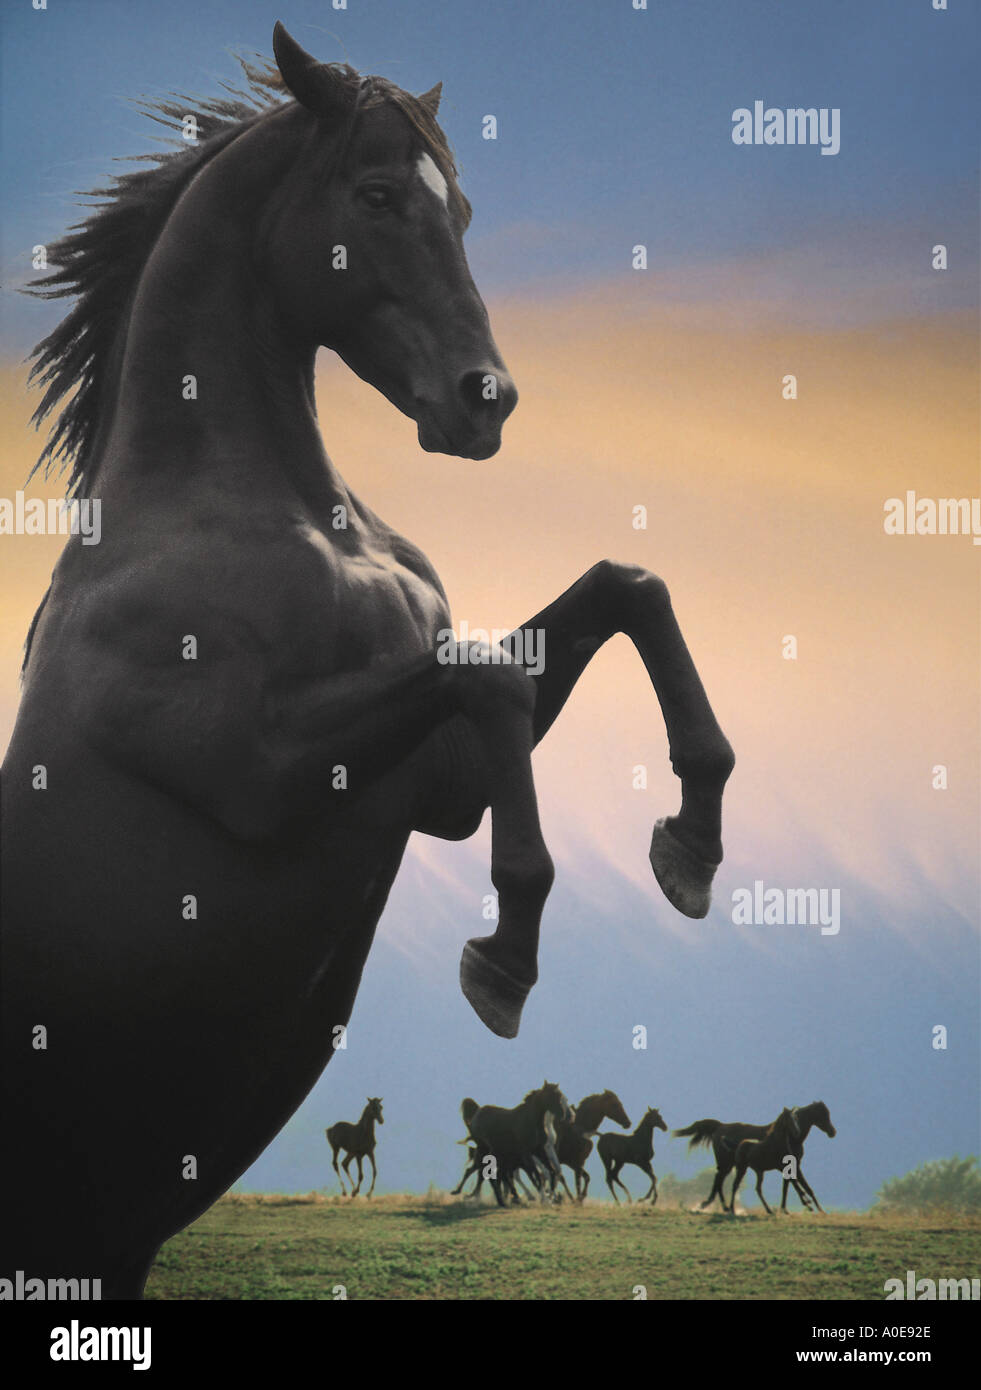 Rearing stallion with mares and foals in background Stock Photo